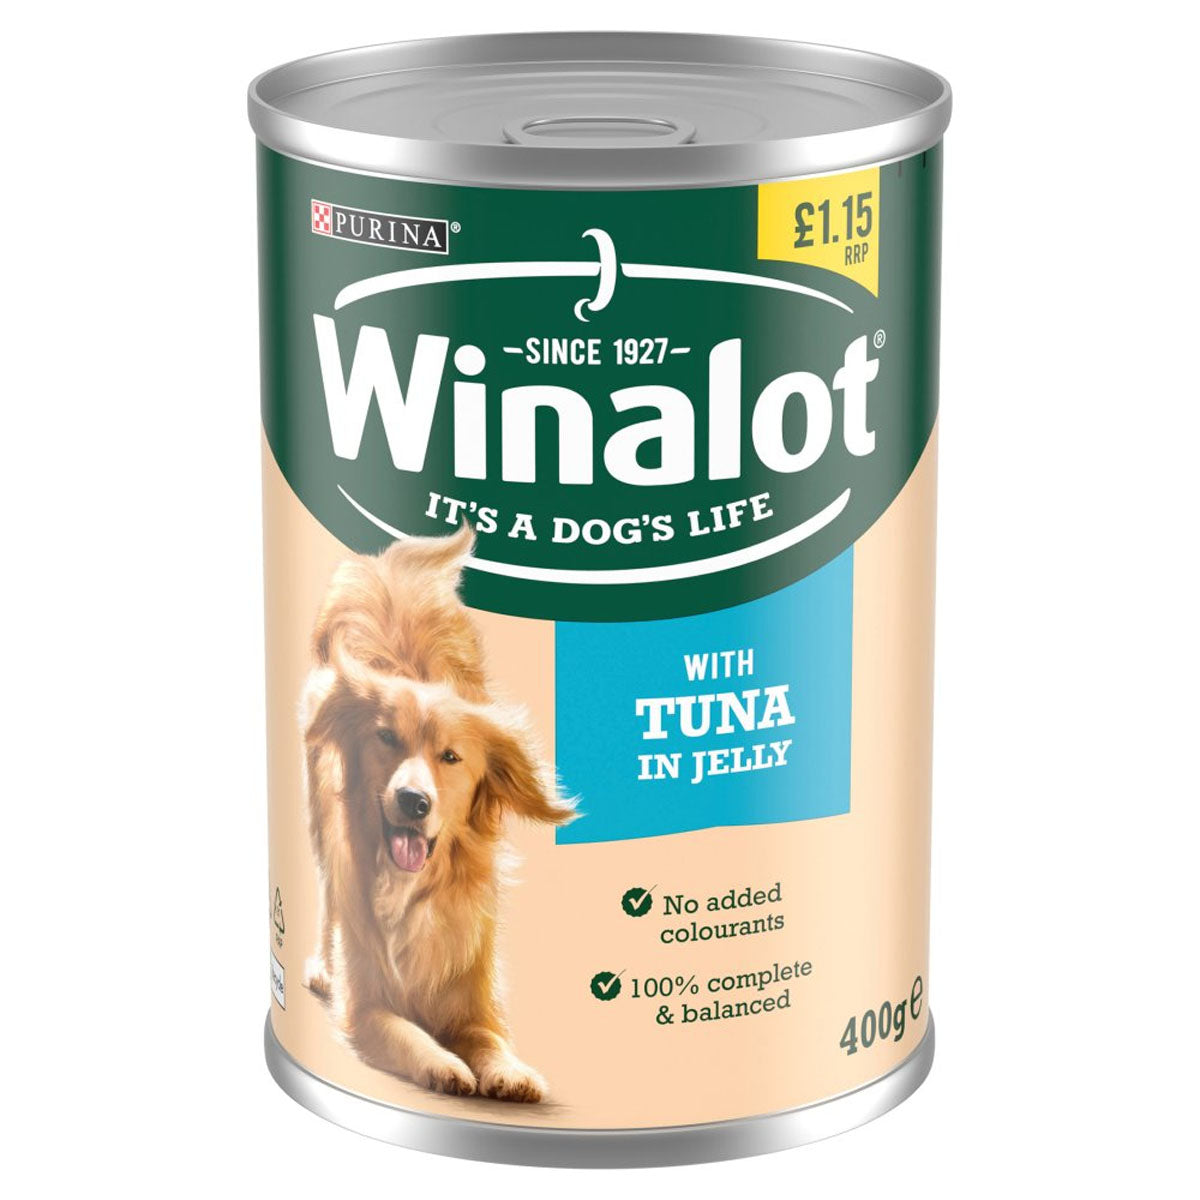 Purina Winalot - With Tuna in Jelly - 400g - Continental Food Store